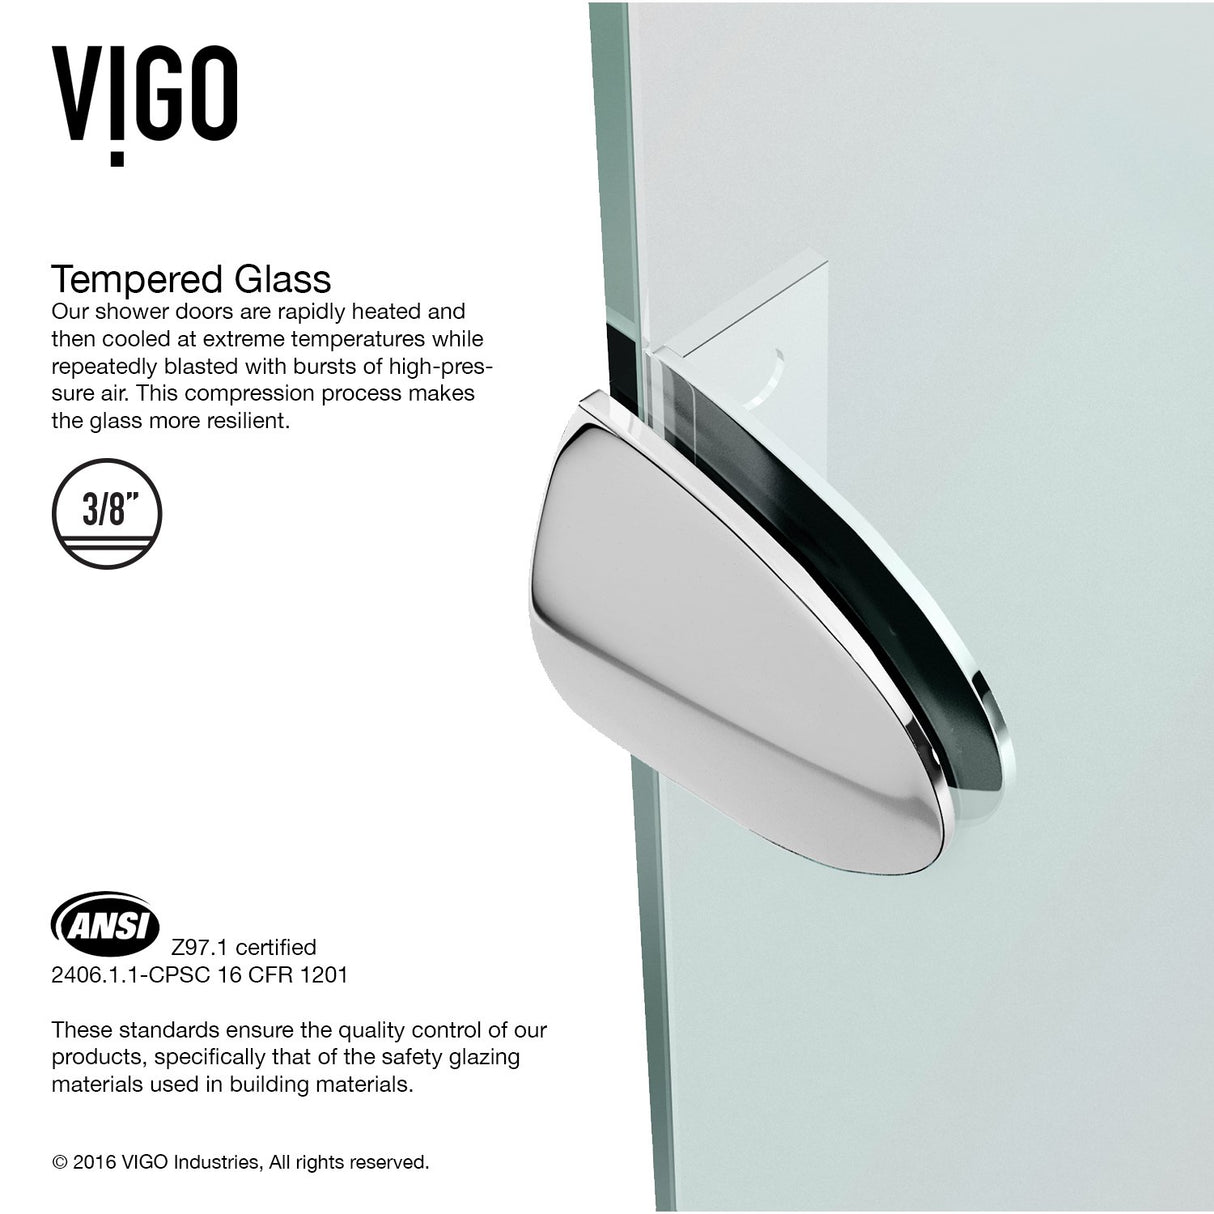 VIGO VG6061CHCL36 34.13" -34.13" W -73.38" H Frameless Hinged Neo-angle Shower Enclosure with Clear 0.38" Tempered Glass and Stainless Steel Hardware in Chrome Finish with Reversible Handle